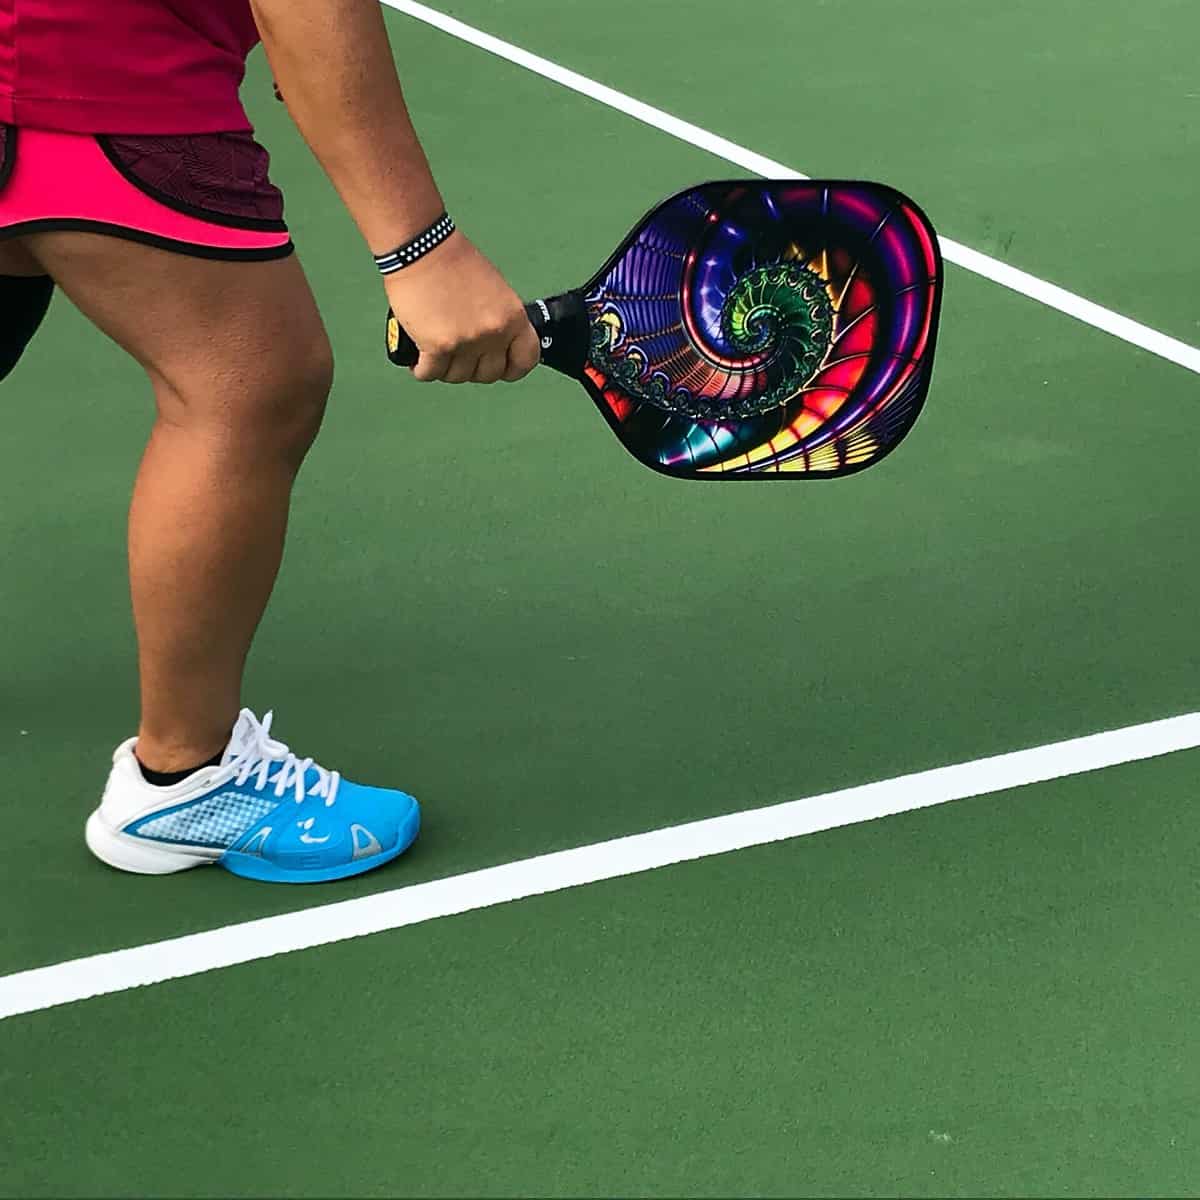 Pickleball returns to Community Park South in Princeton for Memorial Day weekend